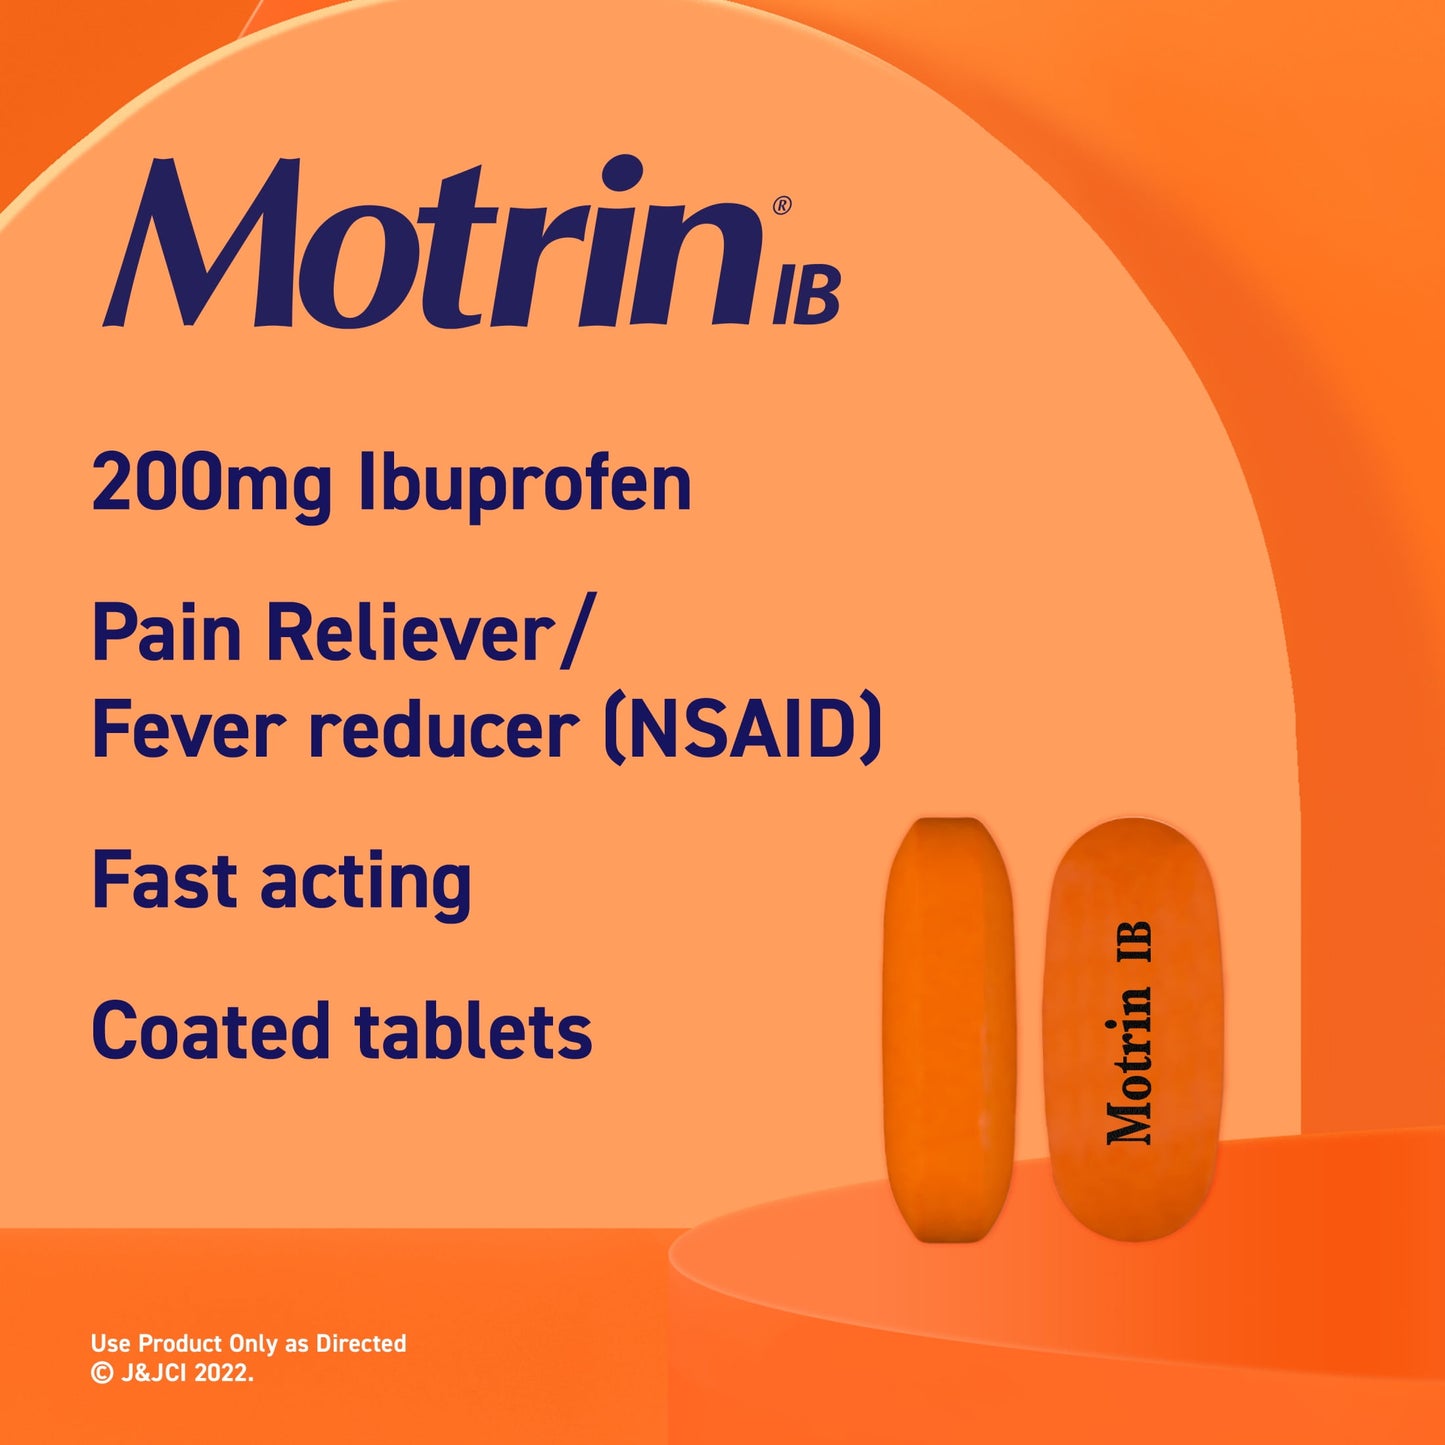 Motrin IB, Ibuprofen 200mg Tablets for Pain & Fever Relief, 100 Ct